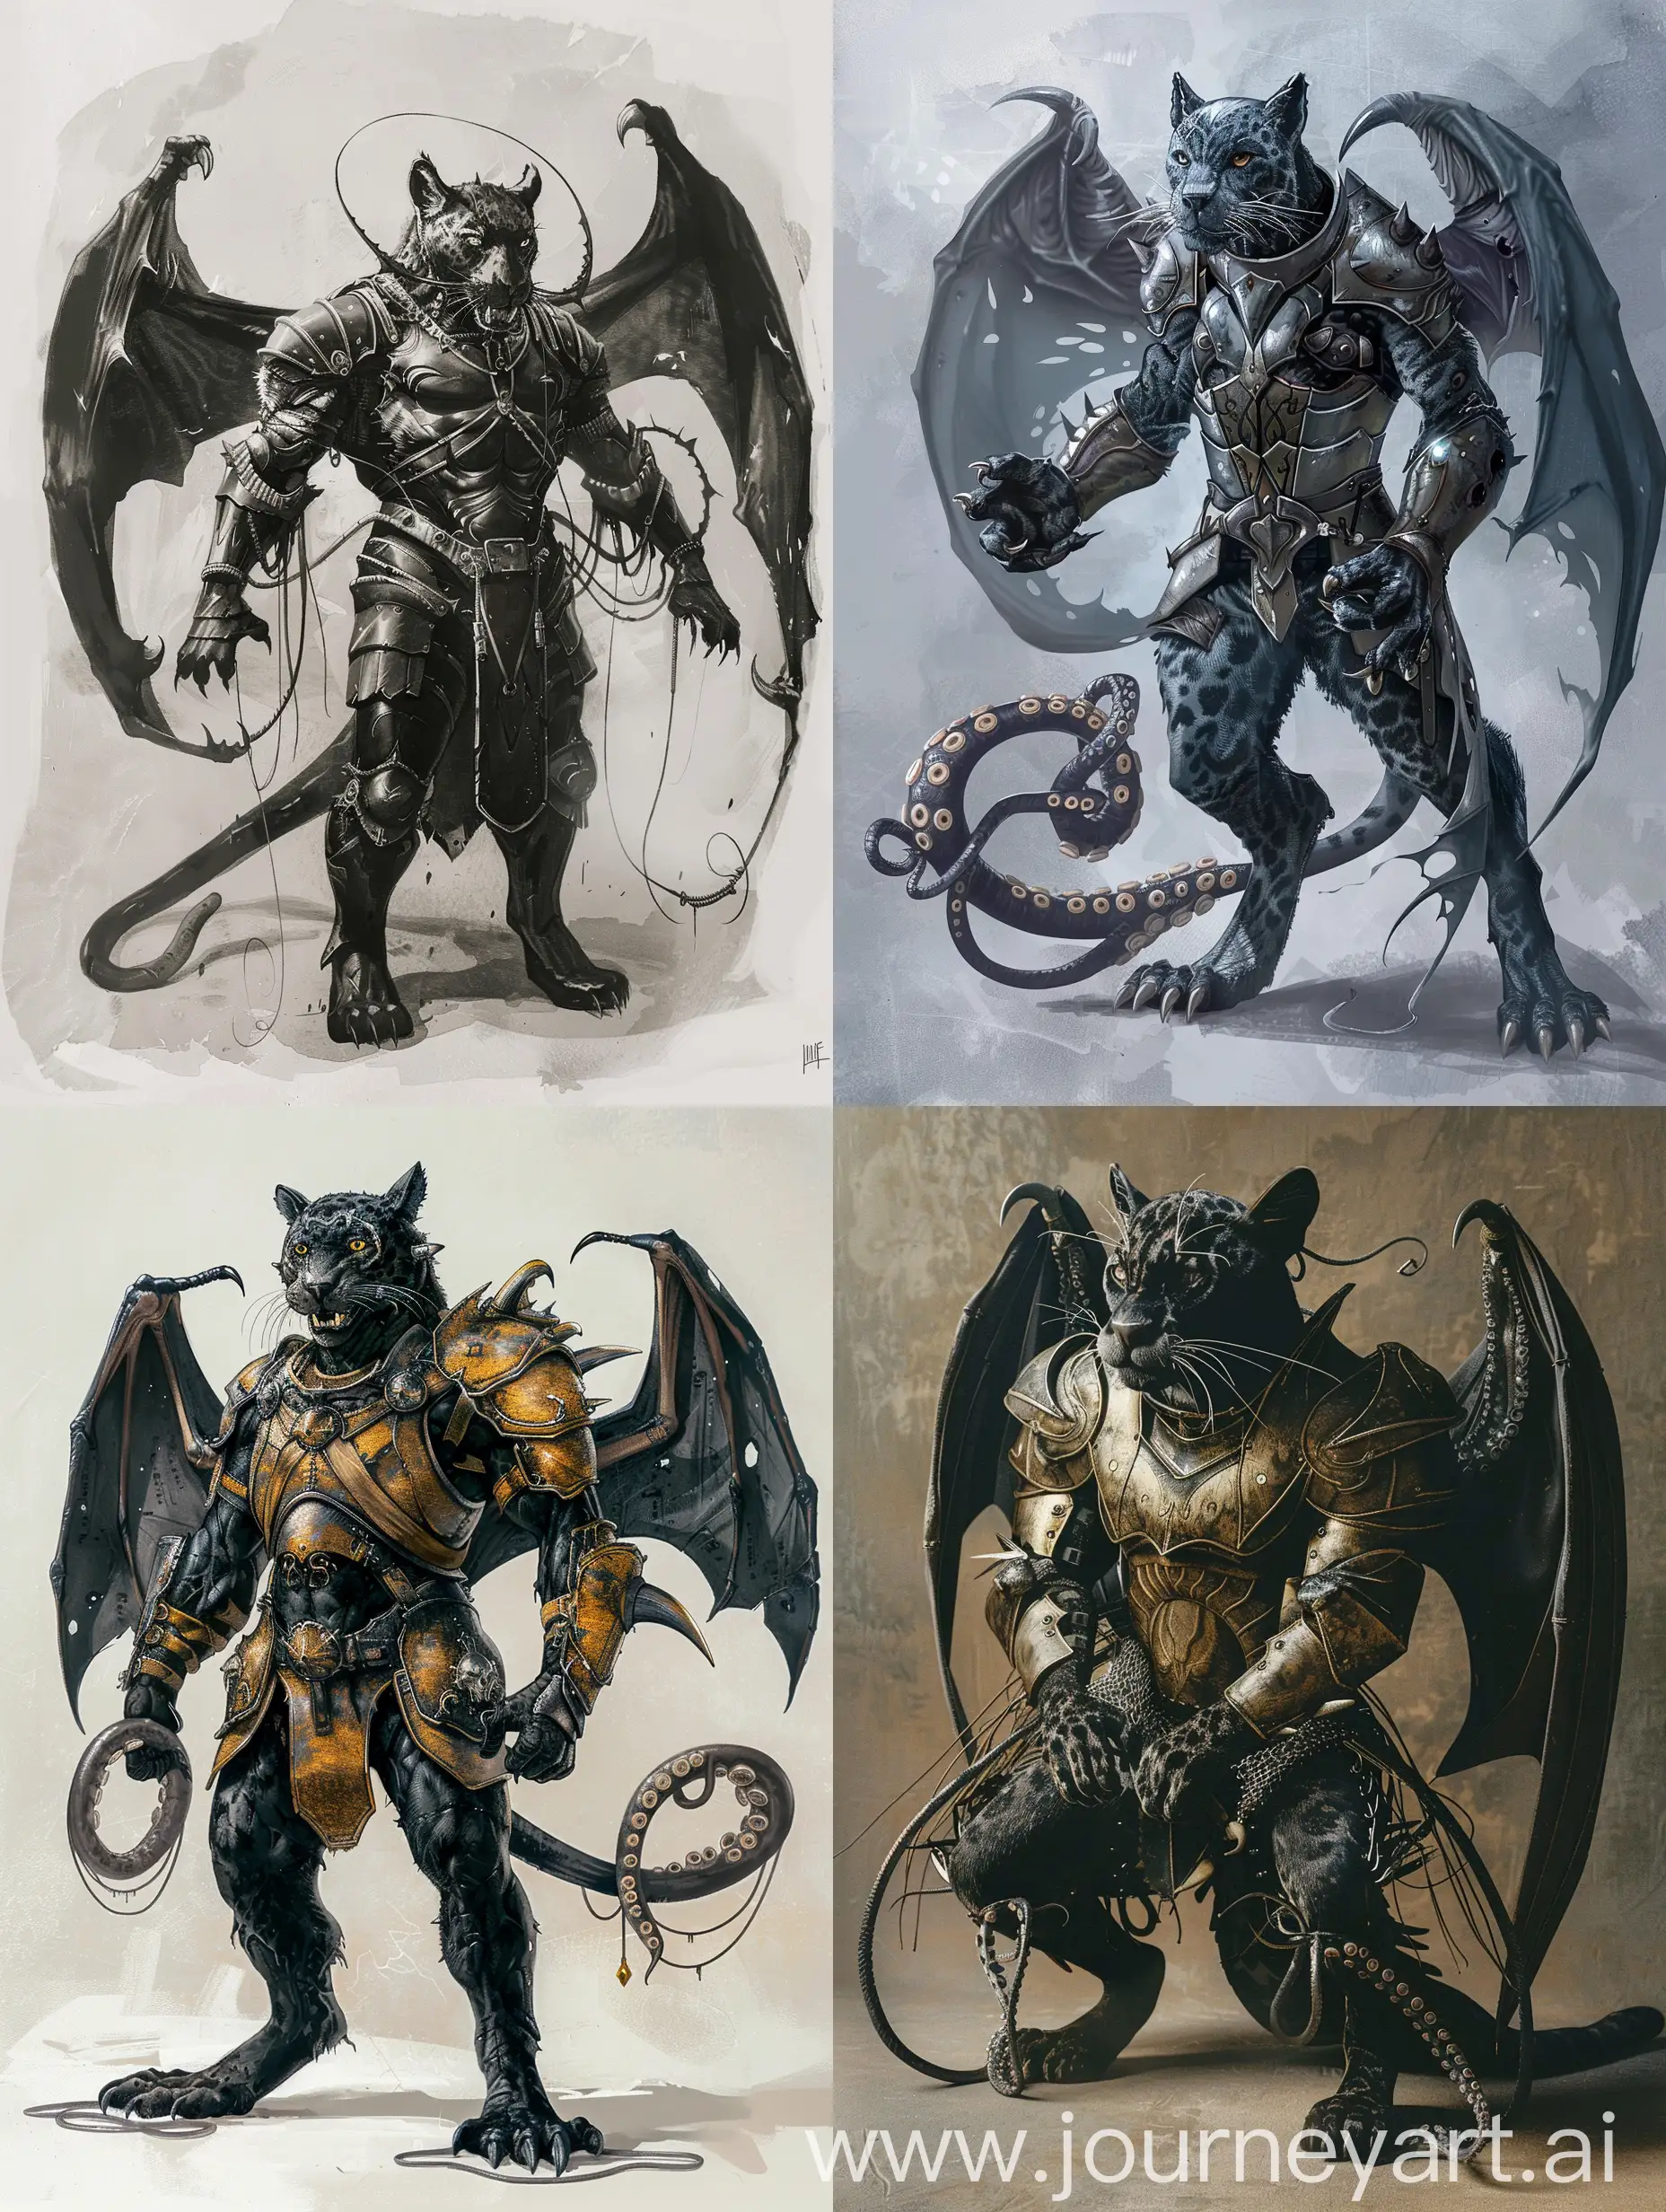 Mythical-Panther-Creature-with-Bat-Wings-and-Armor-Plates